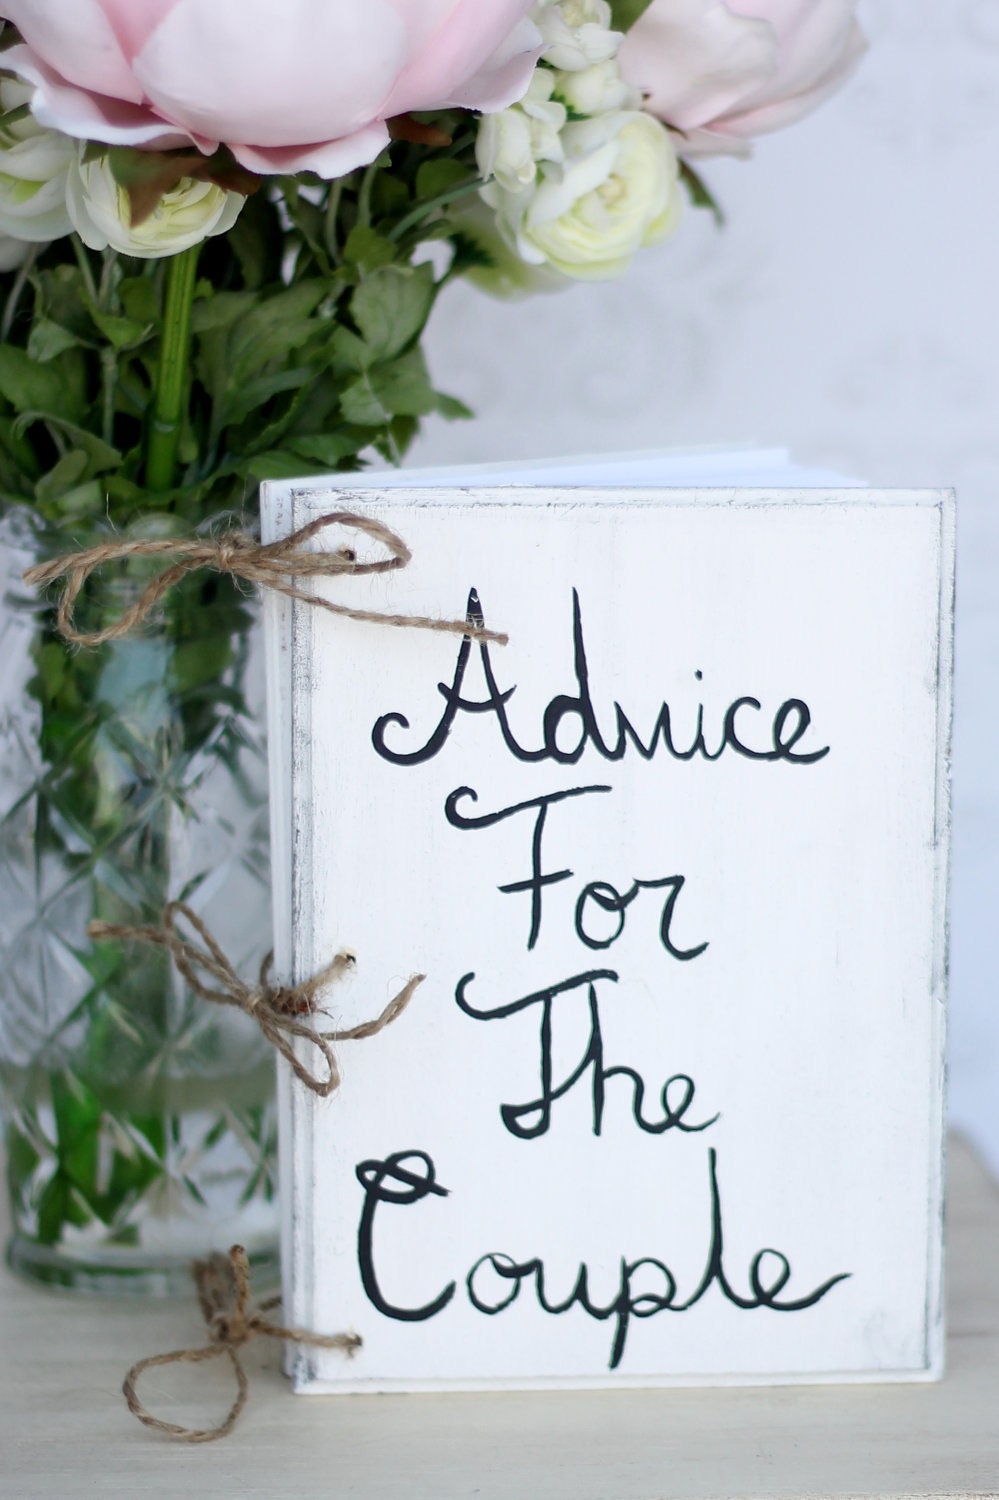 Wedding Guest Book Advice For The Couple Shabby Chic Decor (item P10188)